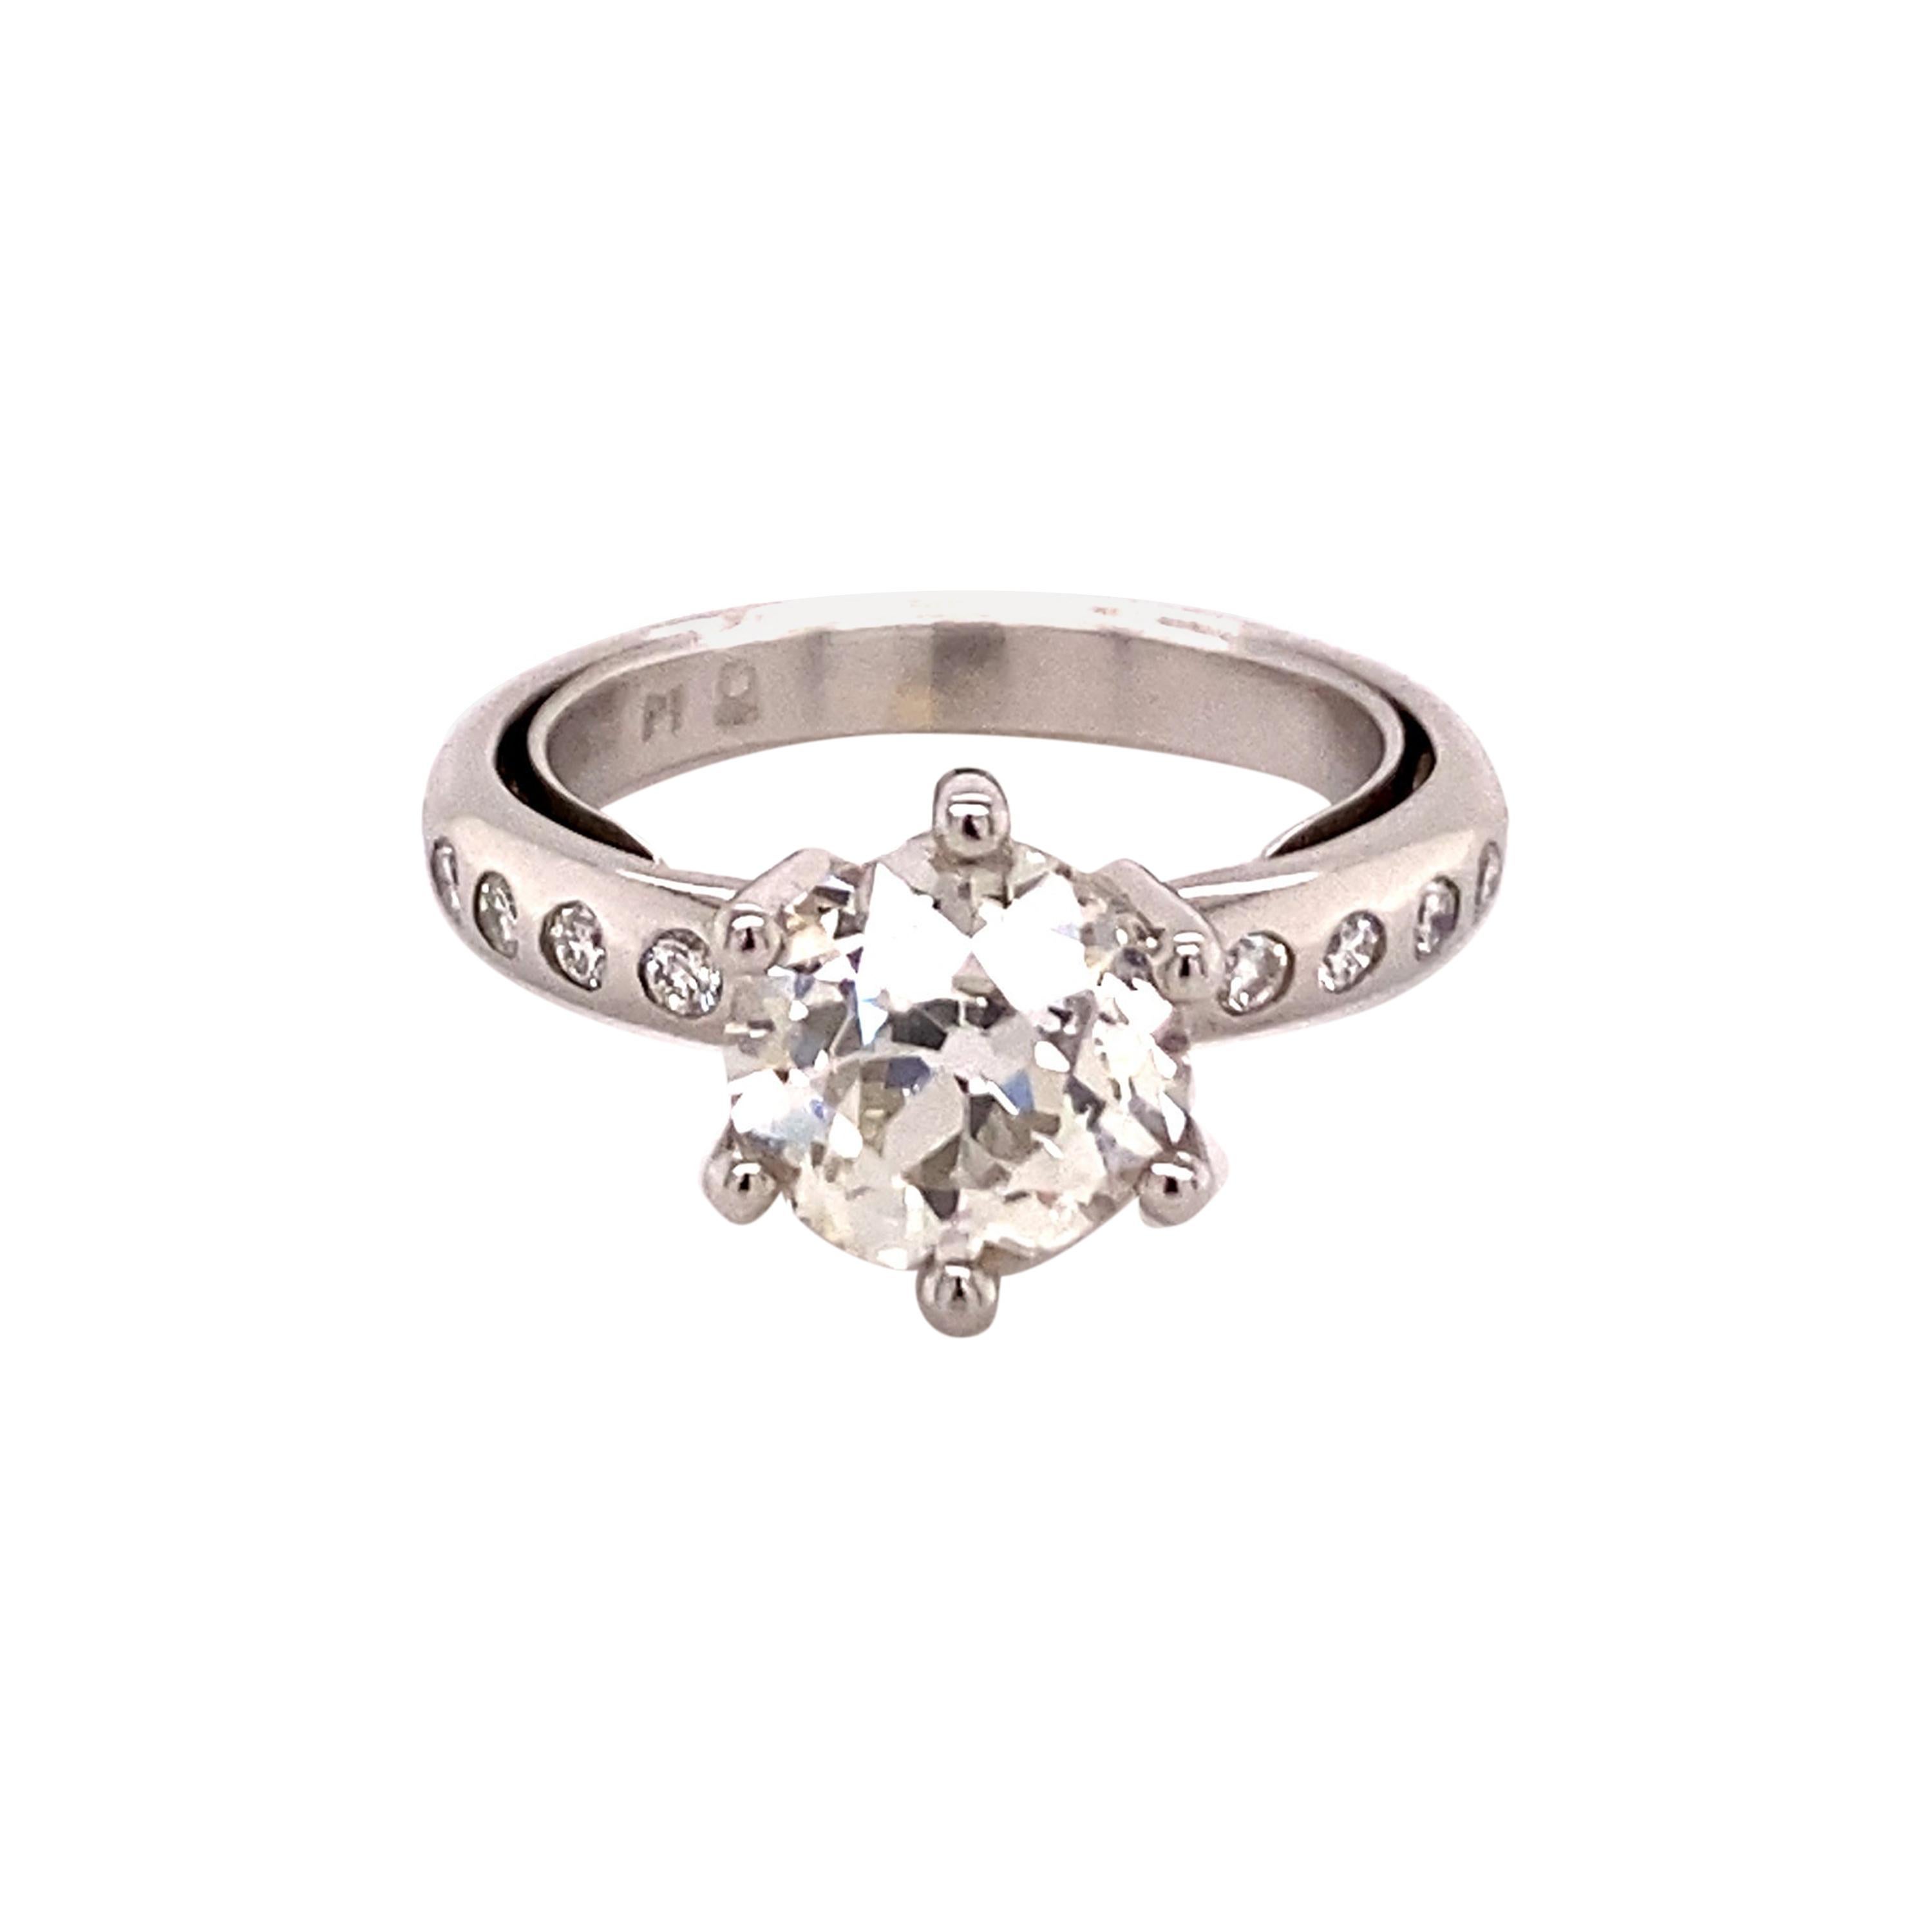 Modern Ring in Platinum 950 Set with Old European-Cut Diamond of 1.70 Ct